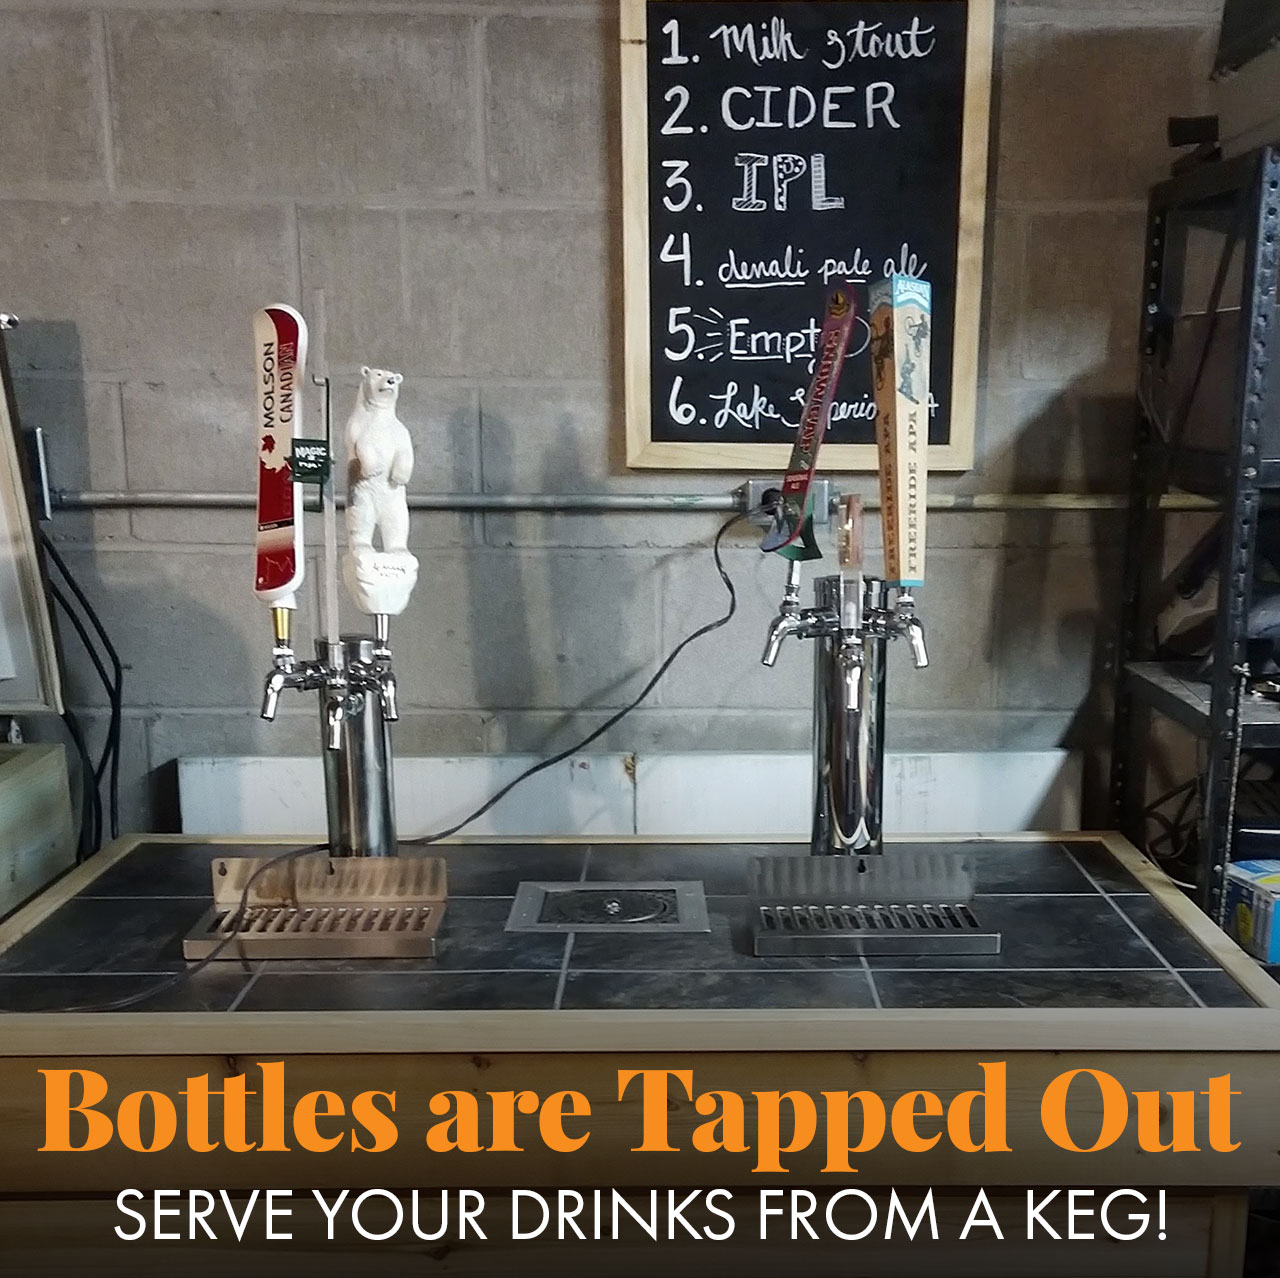 Bottles are Tapped Out. Serve Your Drinks From a Keg